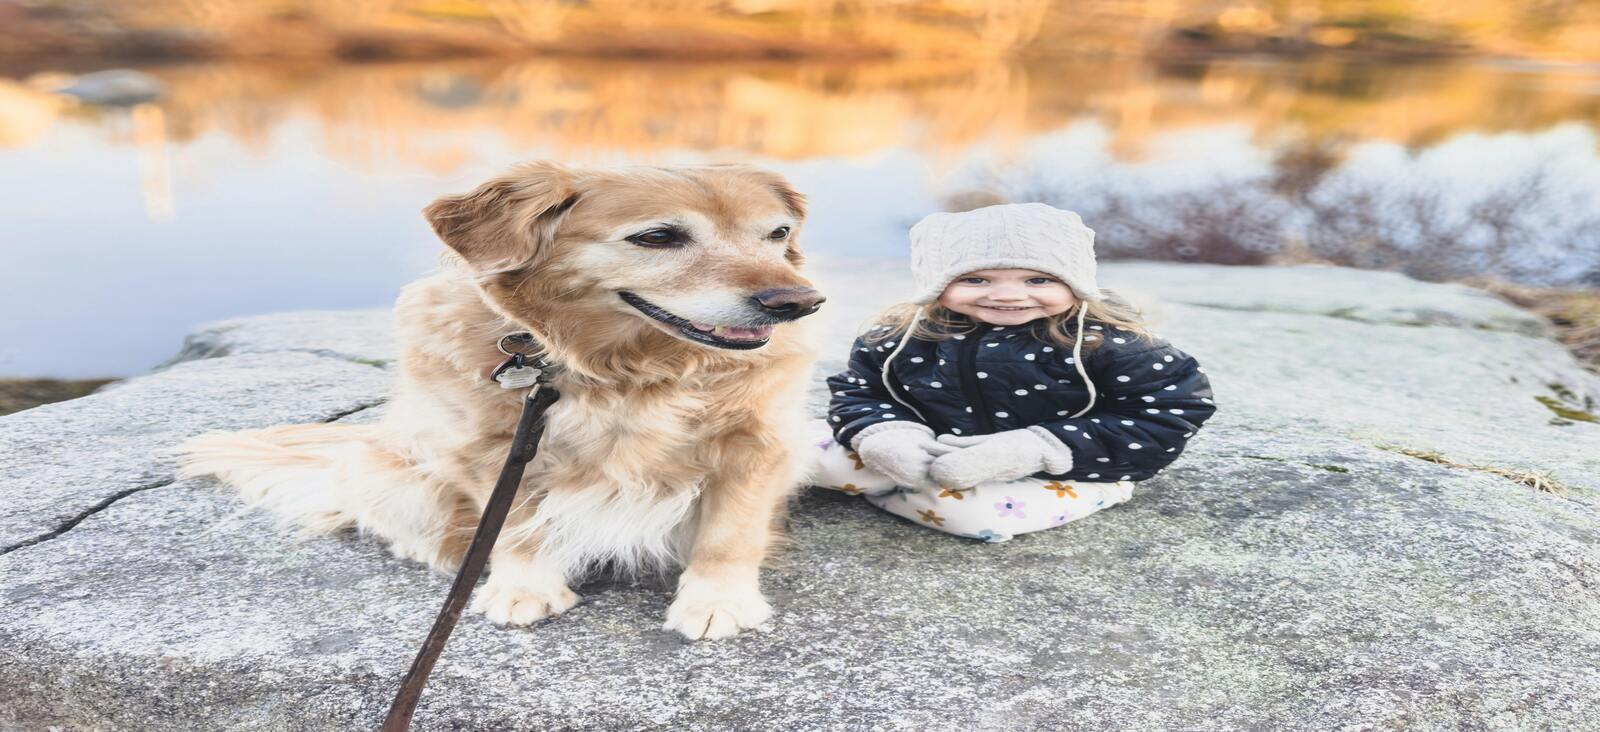 What Should I Do if a Dog Bites My Child?